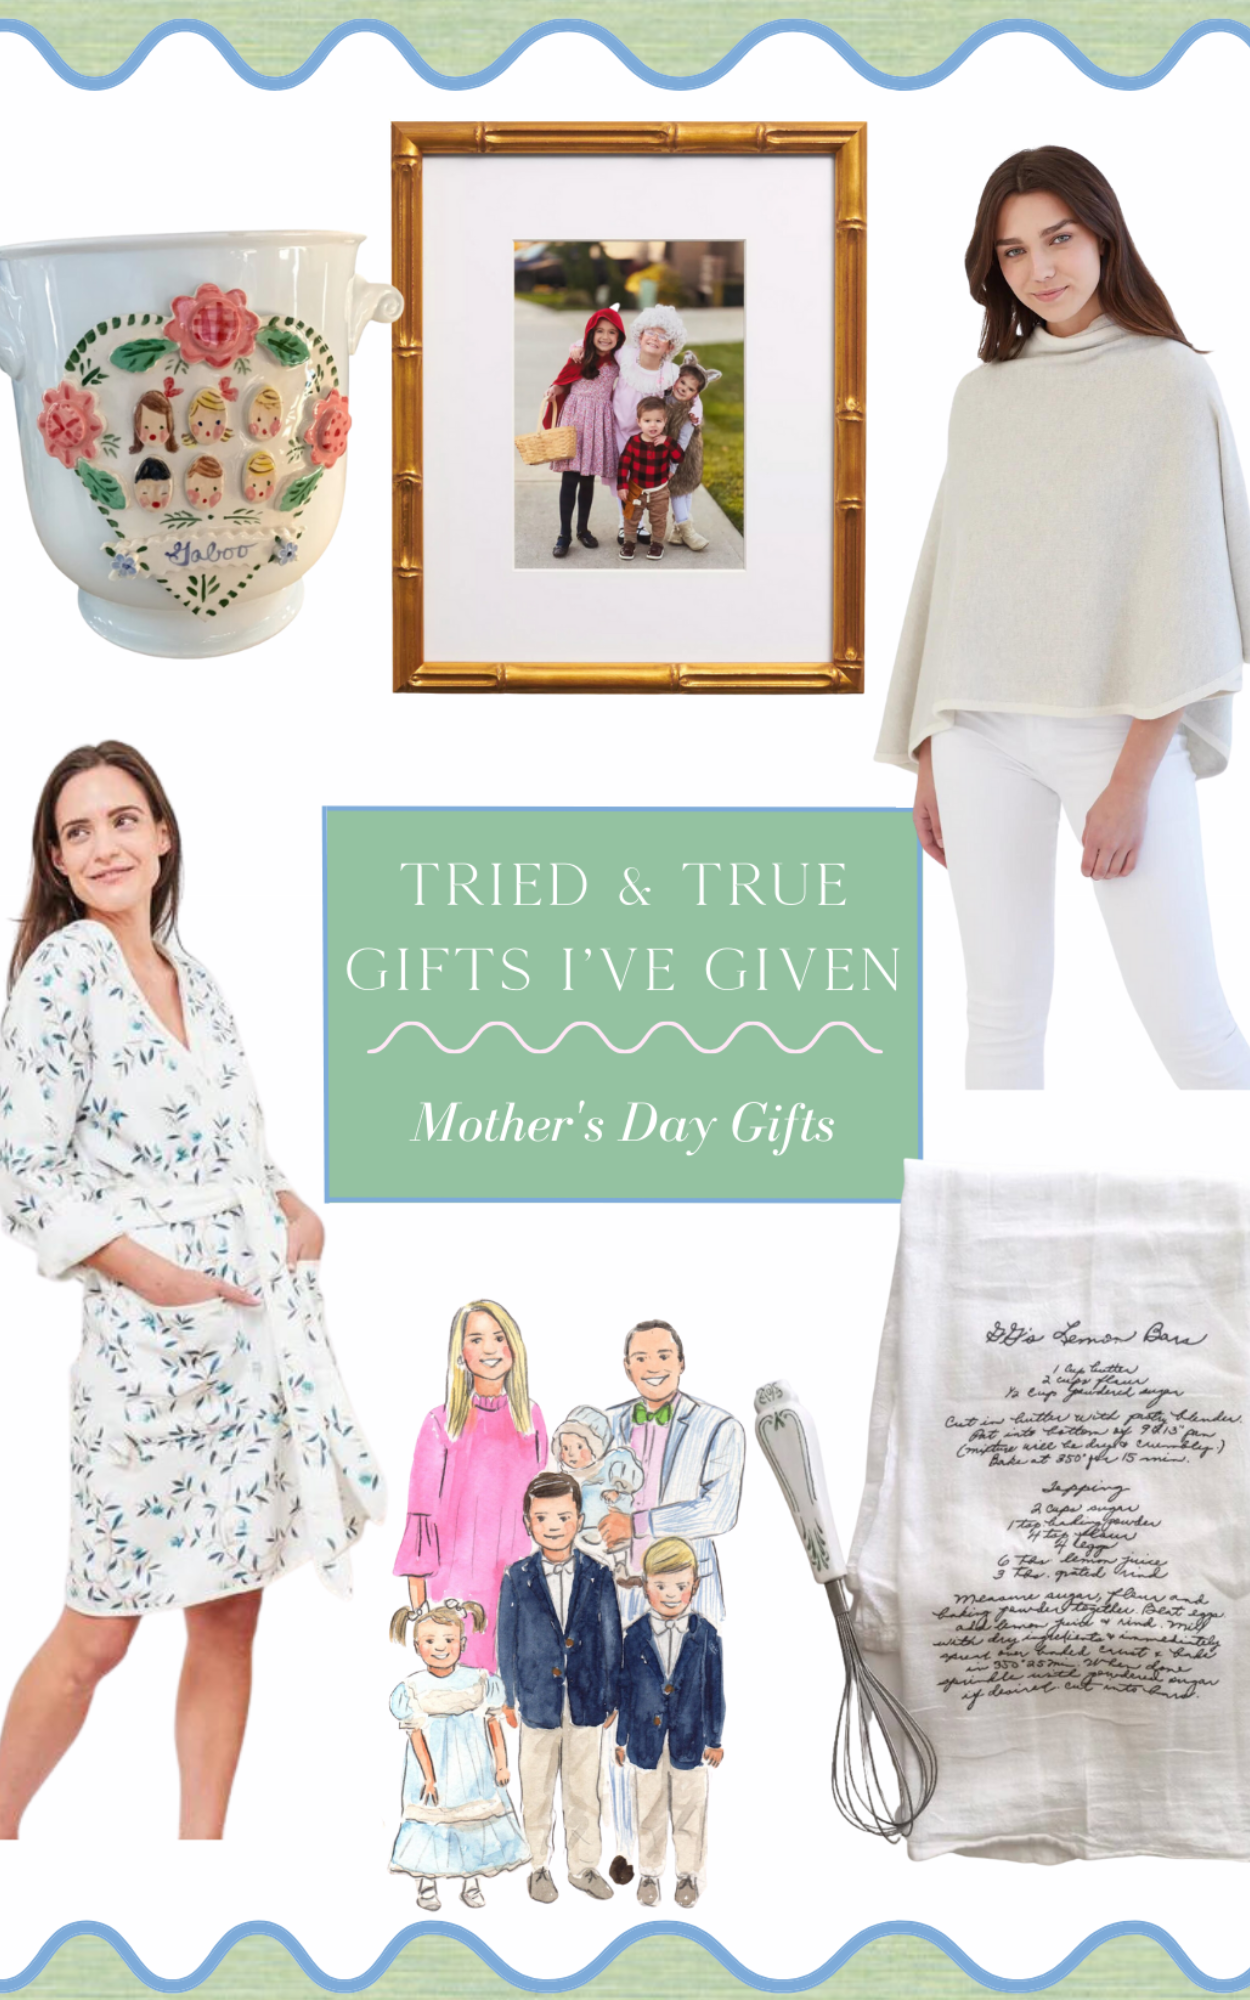 favorite Mother's Day gifts, best Mother's Day gift, tried and true Mother's Day gifts, best Mother's Day gift ideas